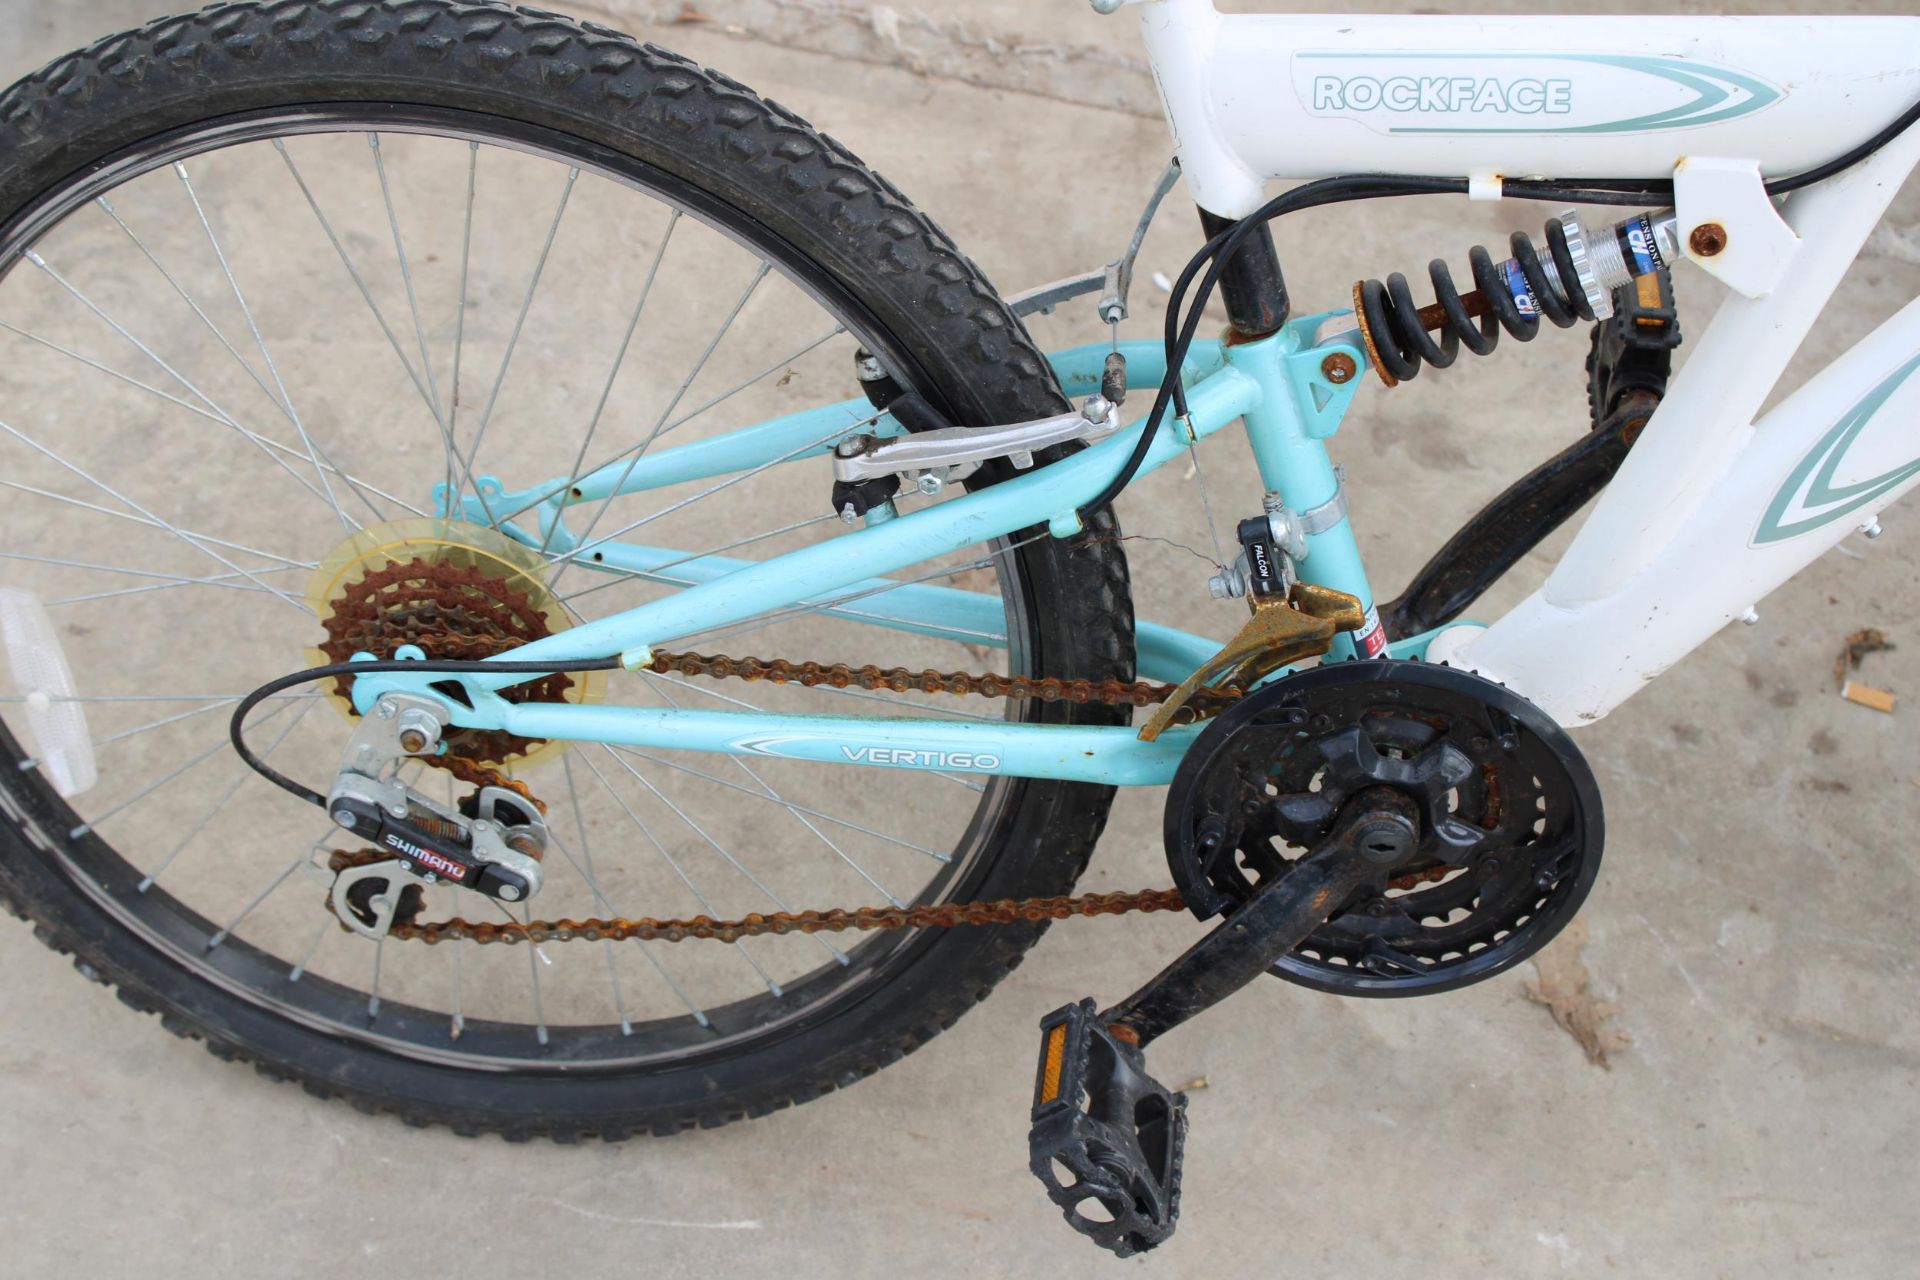 A ROCKFACE CHILDS MOUNTAIN BIKE WITH FRONT AND REAR SUSPENSION AND 18 SPEED SHIMANO GEAR SYSTEMS - Bild 3 aus 4